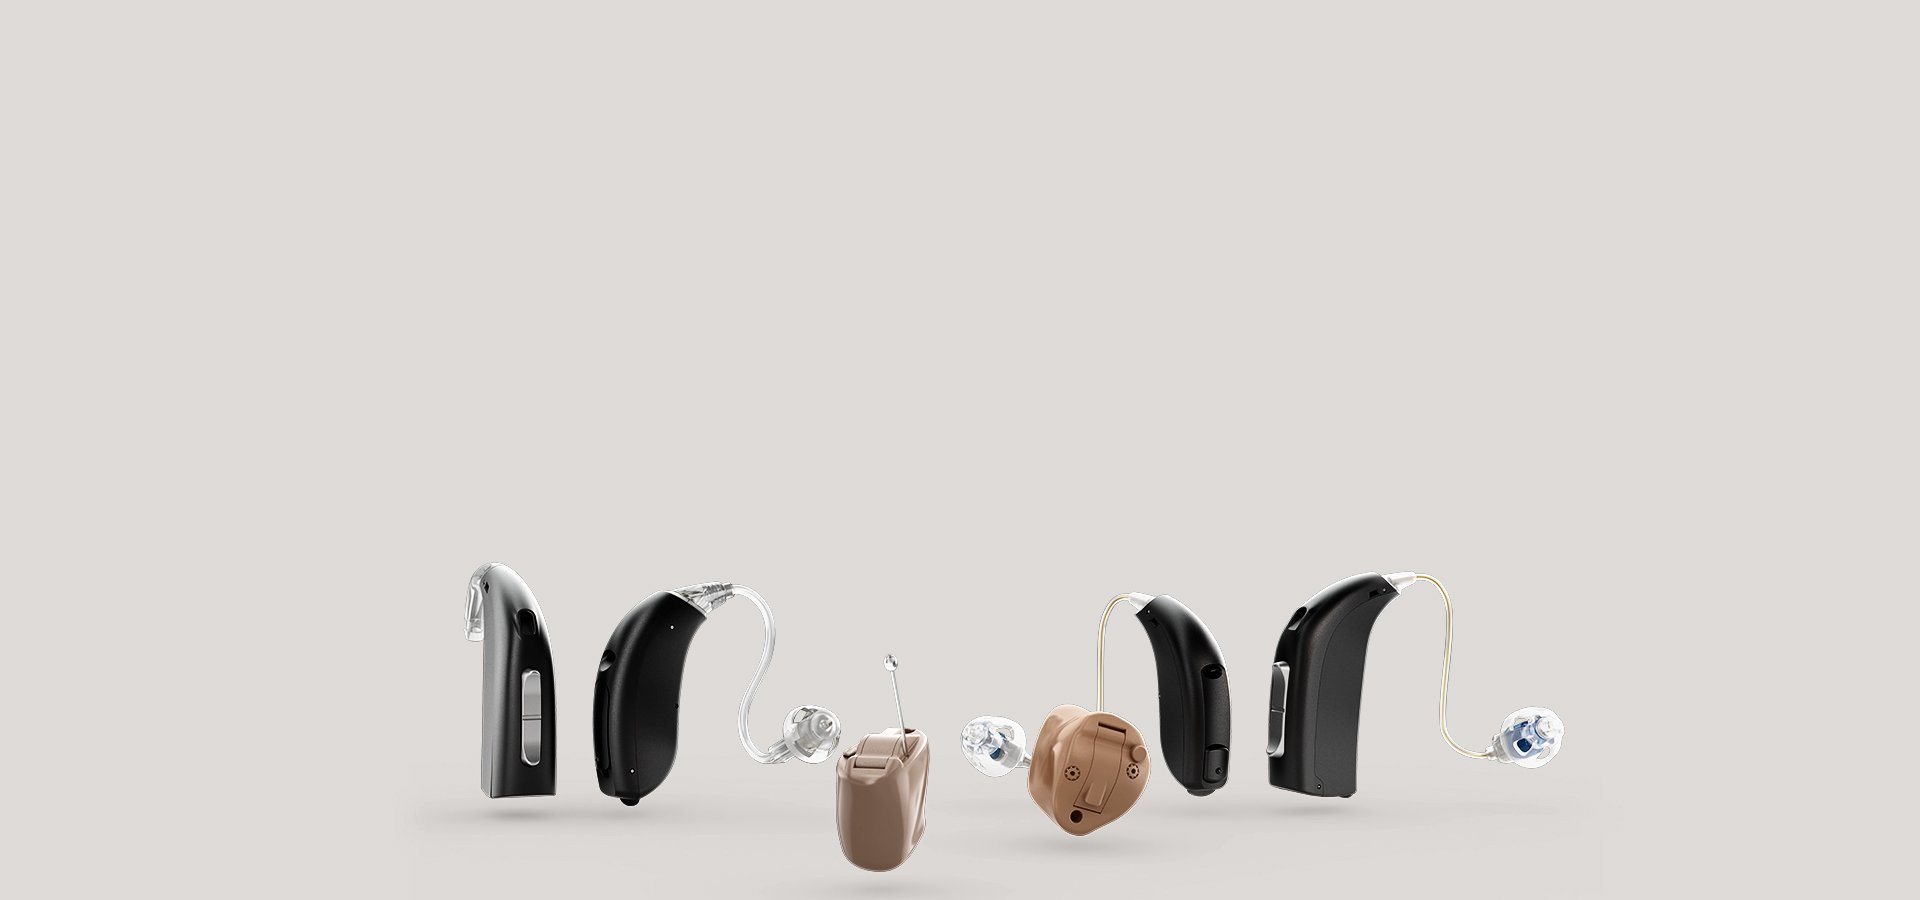 introbanner-kinds-of-hearing-aids-1920x900